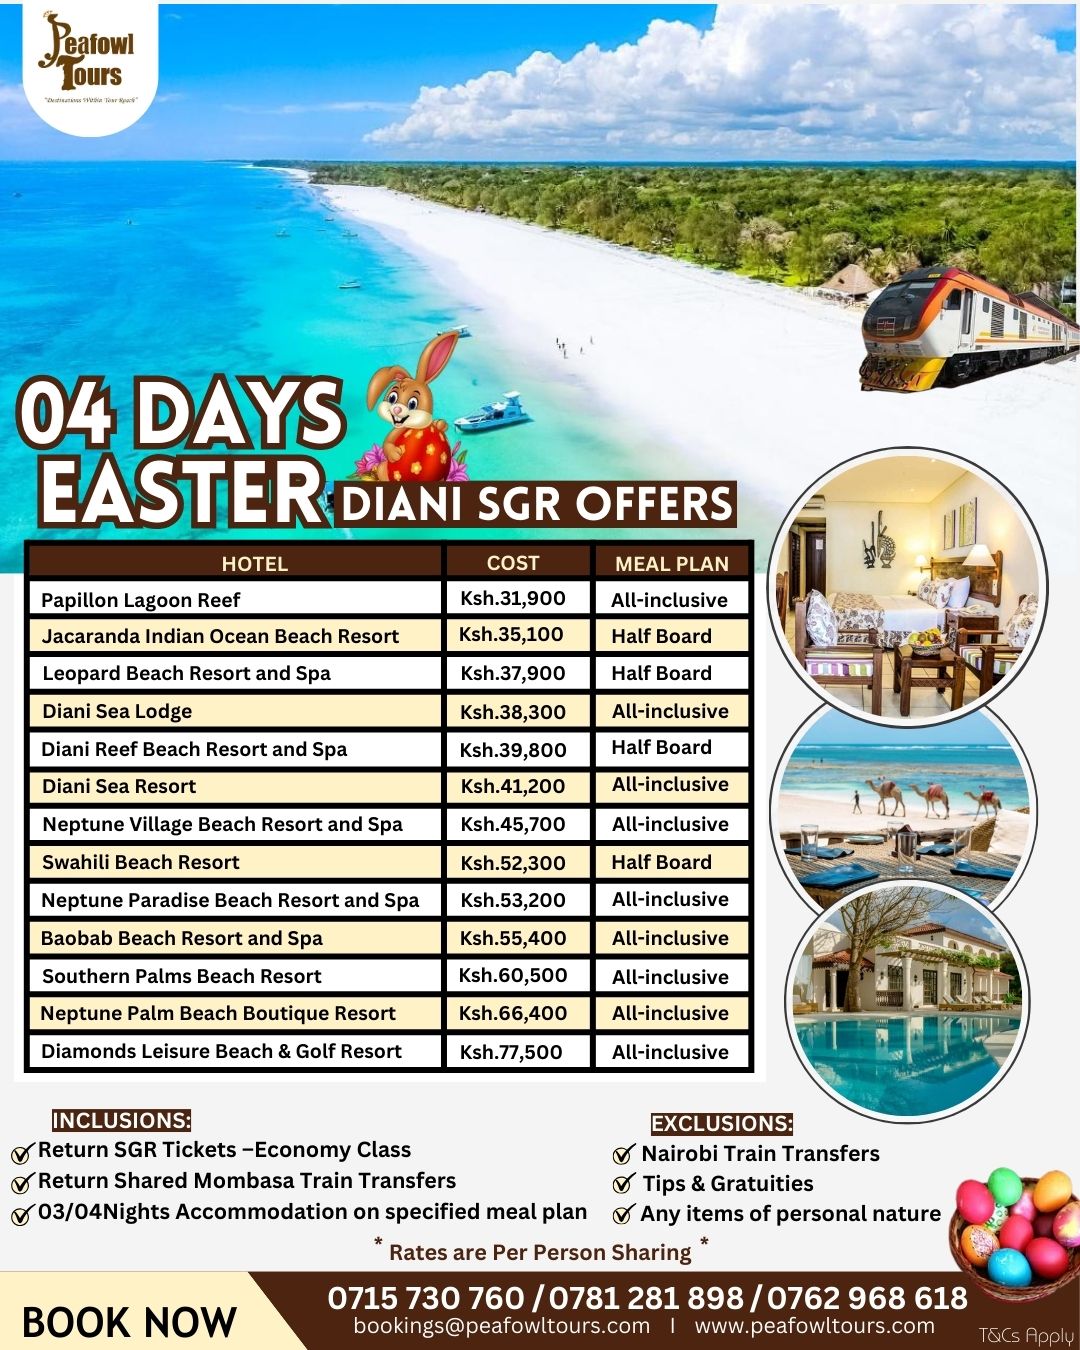 <br />
<b>Notice</b>:  Undefined variable: url_var in <b>/home/peafowlt/public_html/easter_offers.php</b> on line <b>32</b><br />
